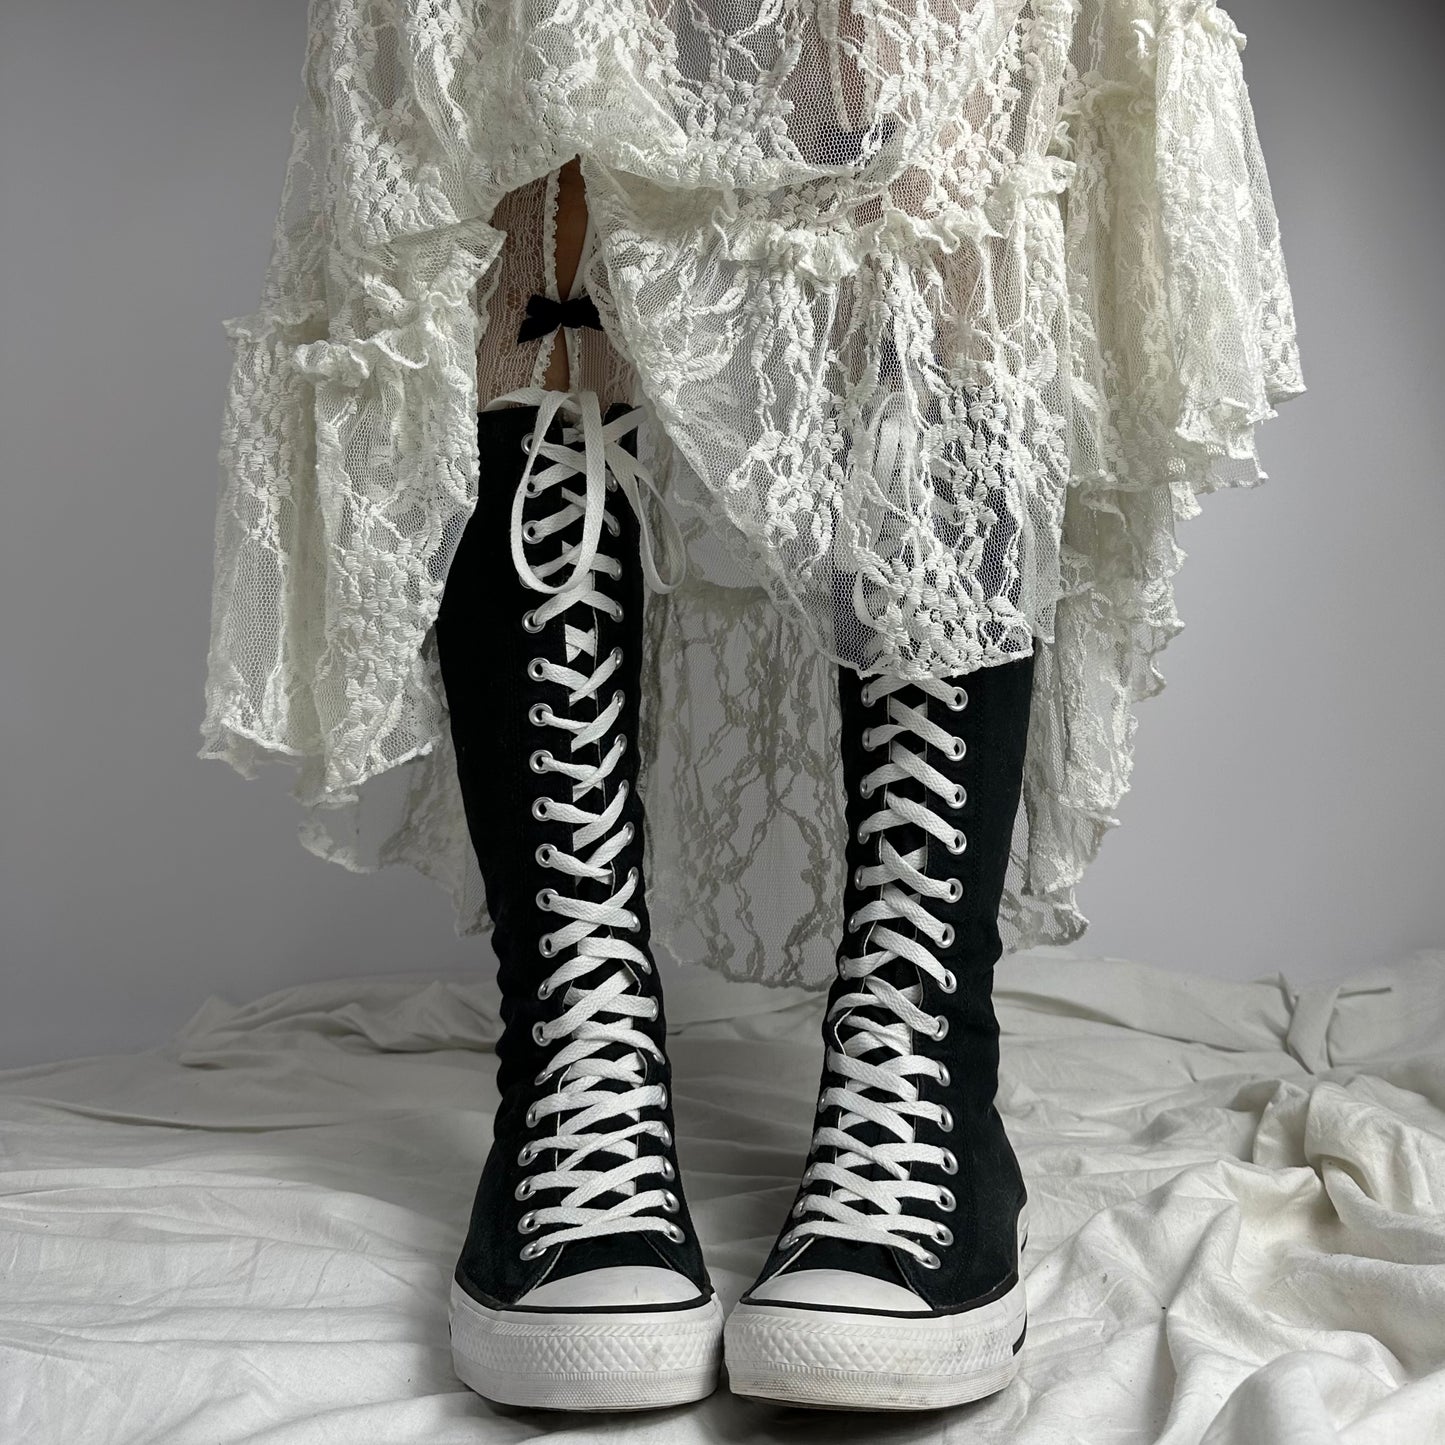 Converse Vintage Knee High Lace Up Boots 37.5& 40/41